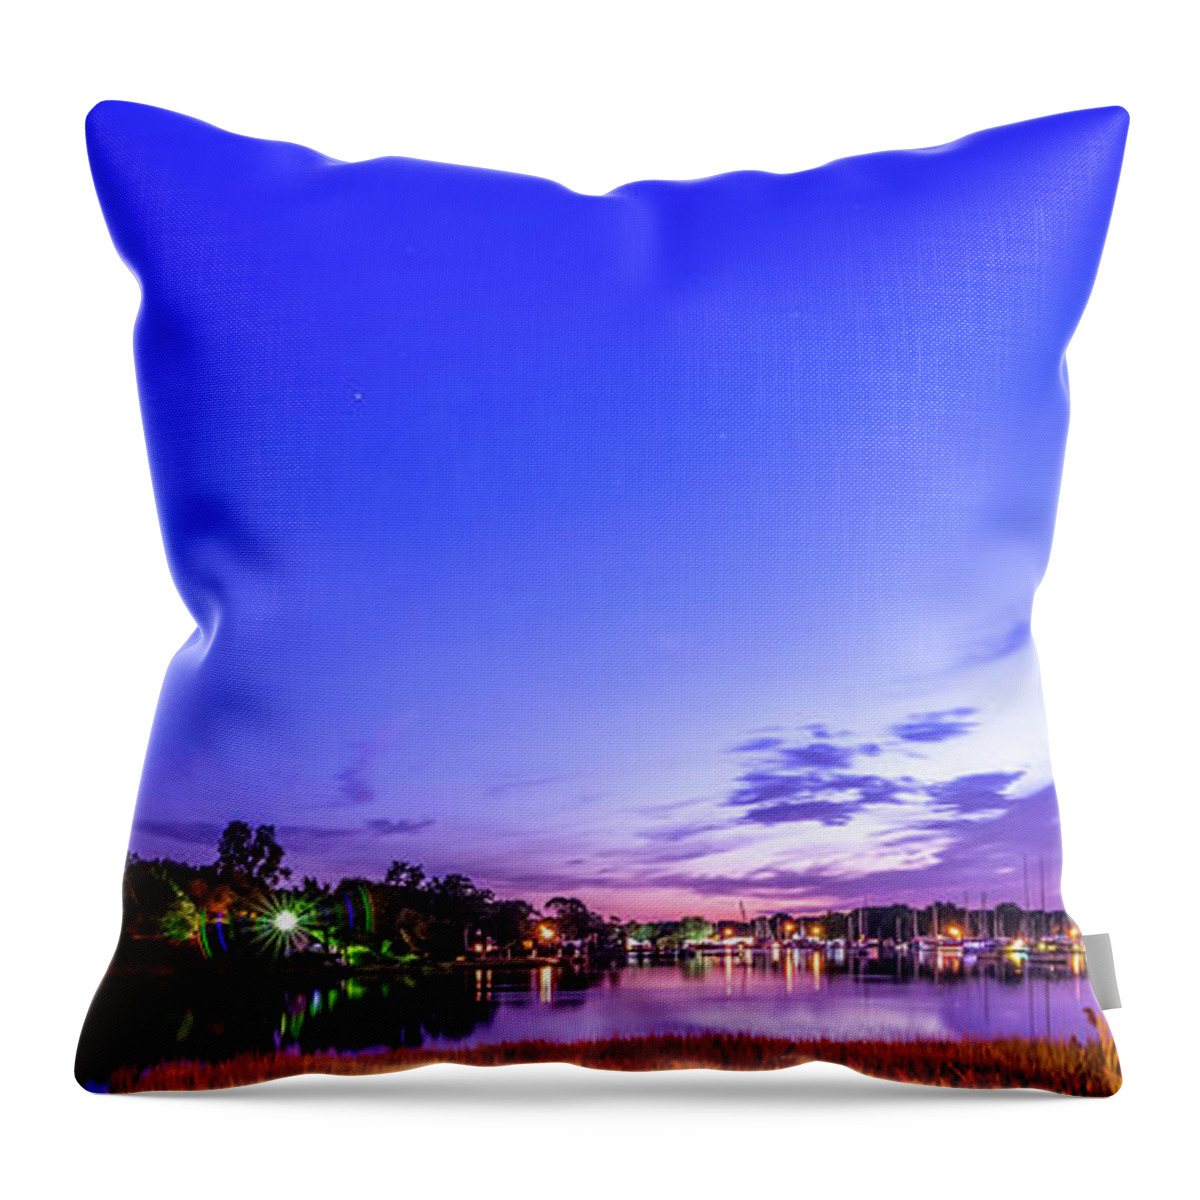 Warwick Cove Throw Pillow featuring the photograph Sunset Over Warwick Cove In Rhode Island #1 by Alex Grichenko